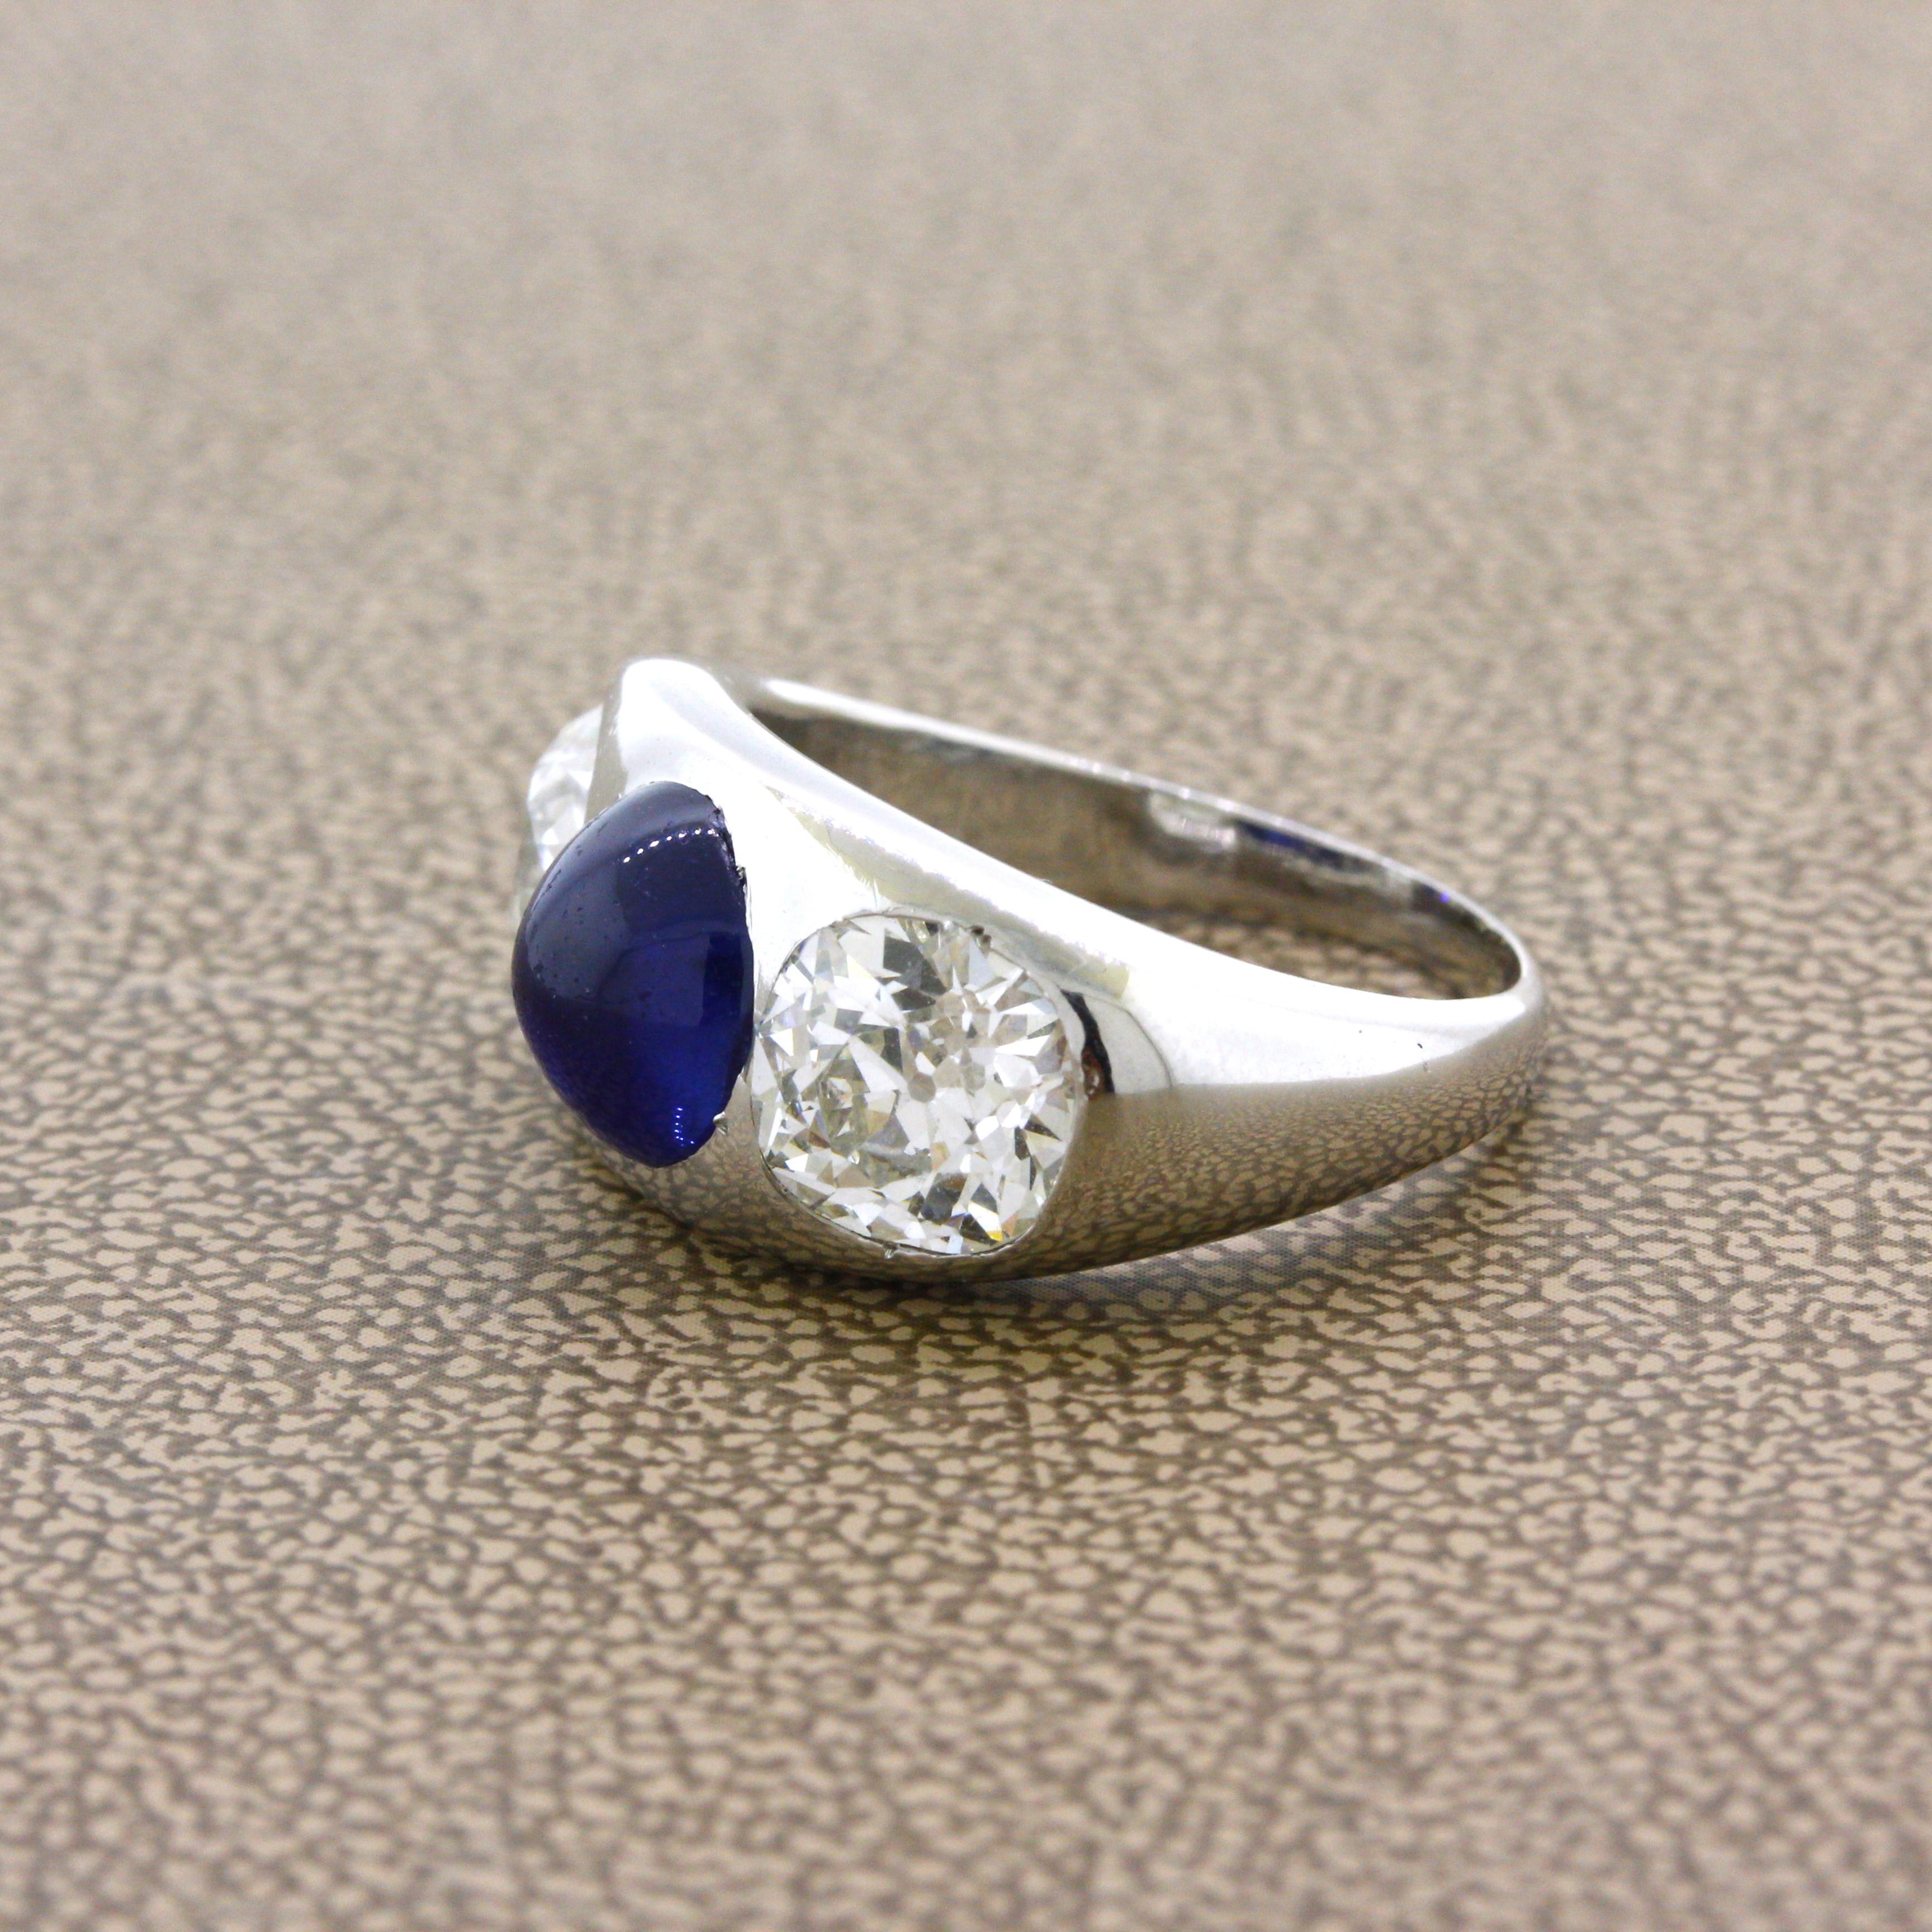 Antique-Style Sapphire Diamond 3-Stone Platinum Ring, AGL Certified In New Condition For Sale In Beverly Hills, CA